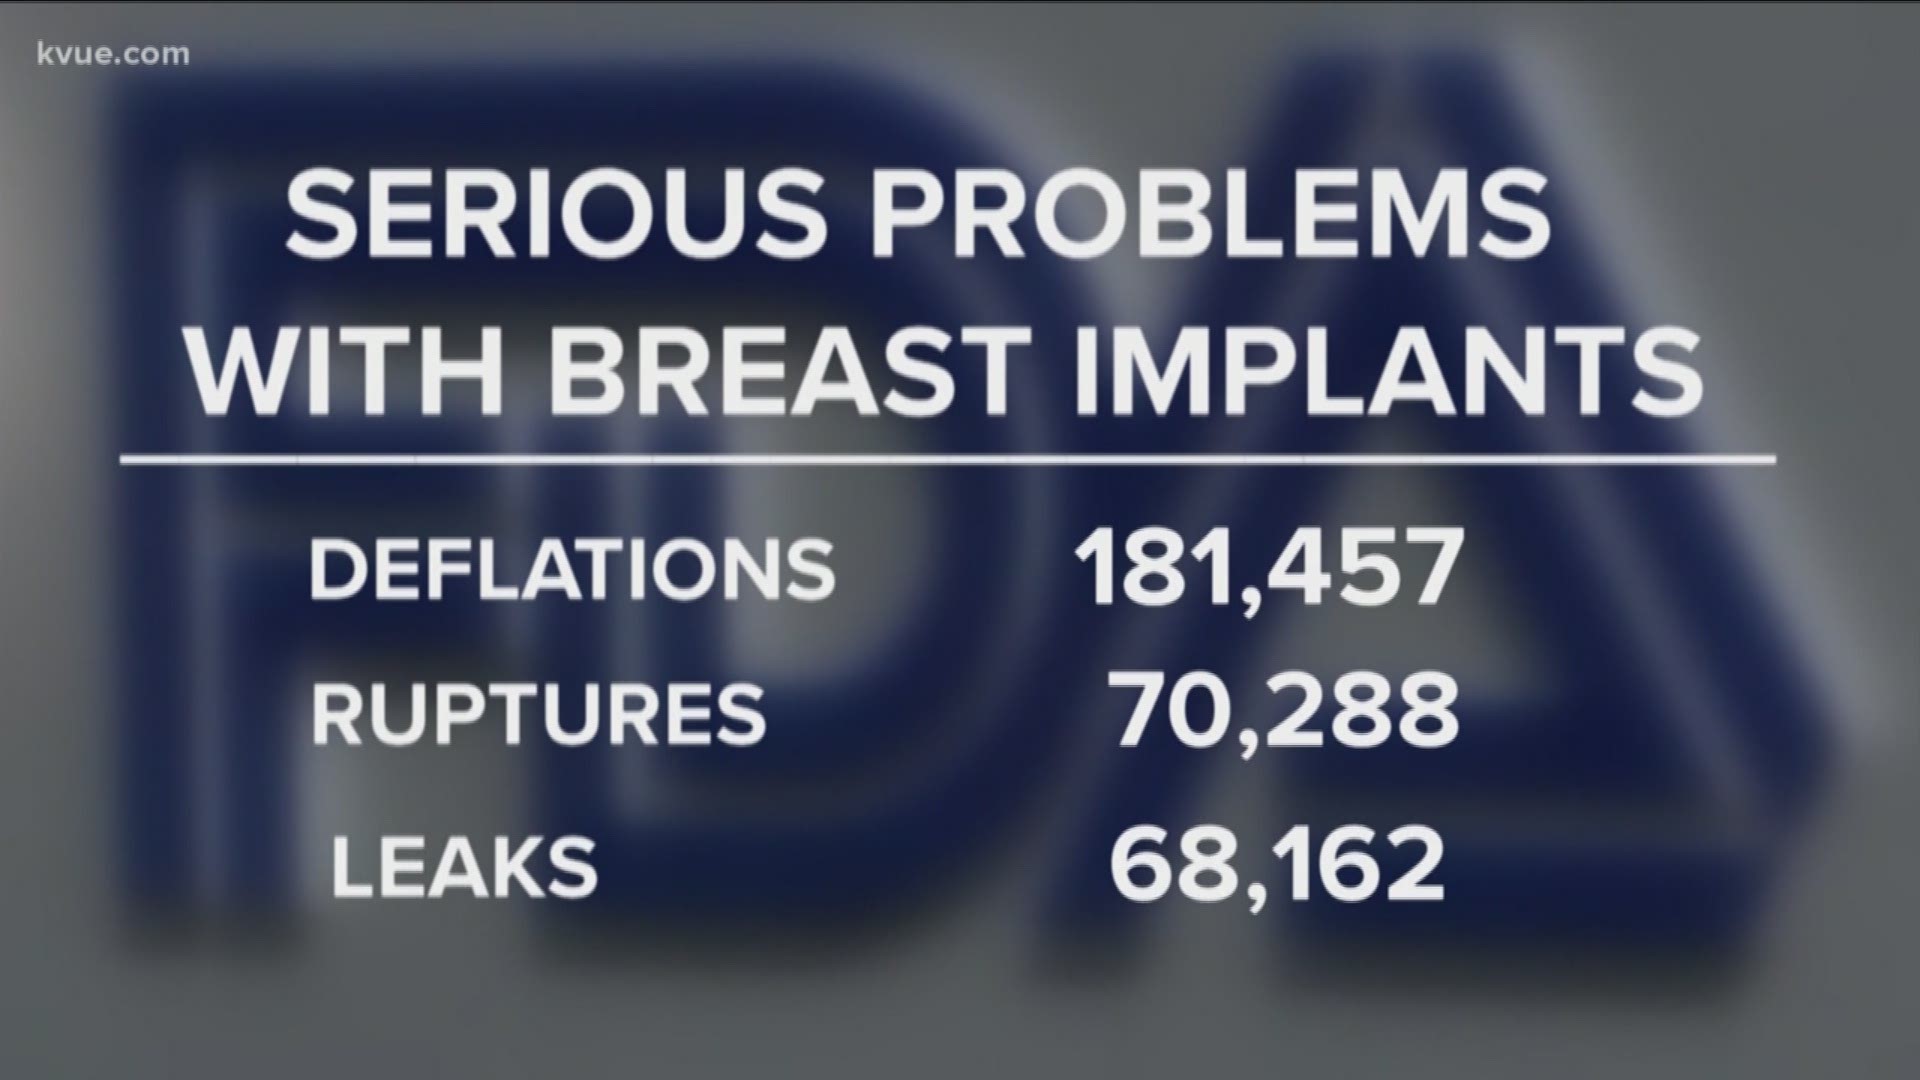 The KVUE Defenders are getting a first look at millions of problems with medical devices that remained secret for decades.